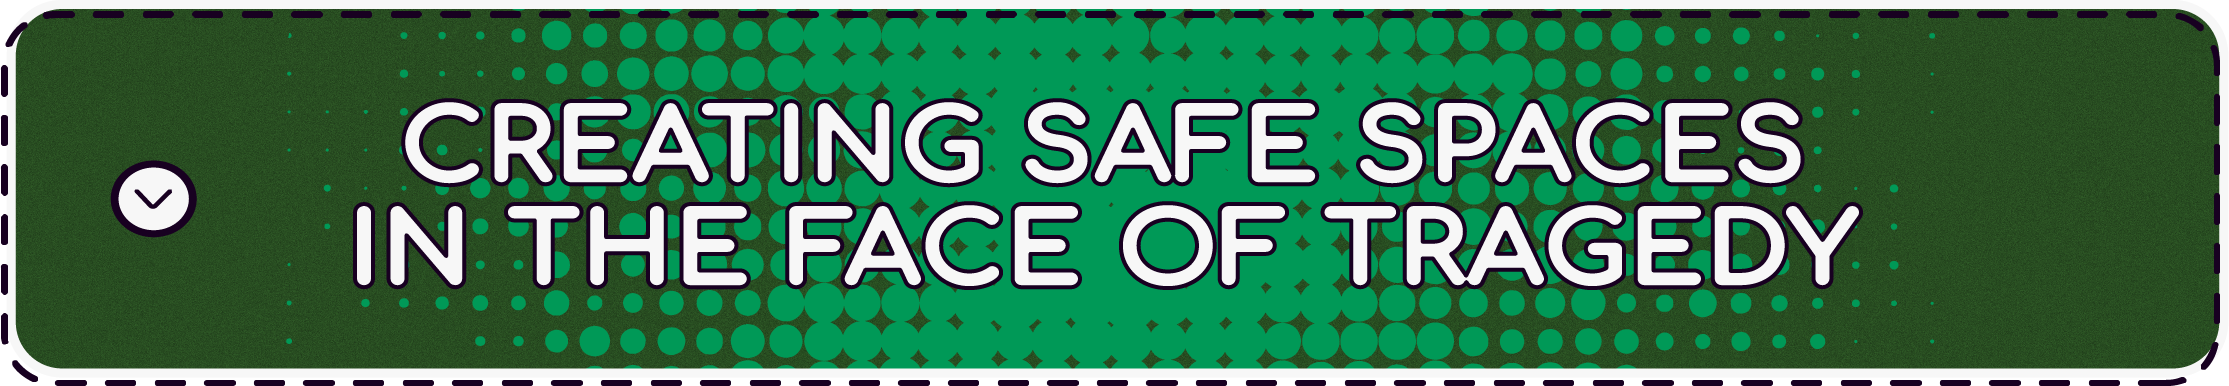 Creating Safe Spaces image